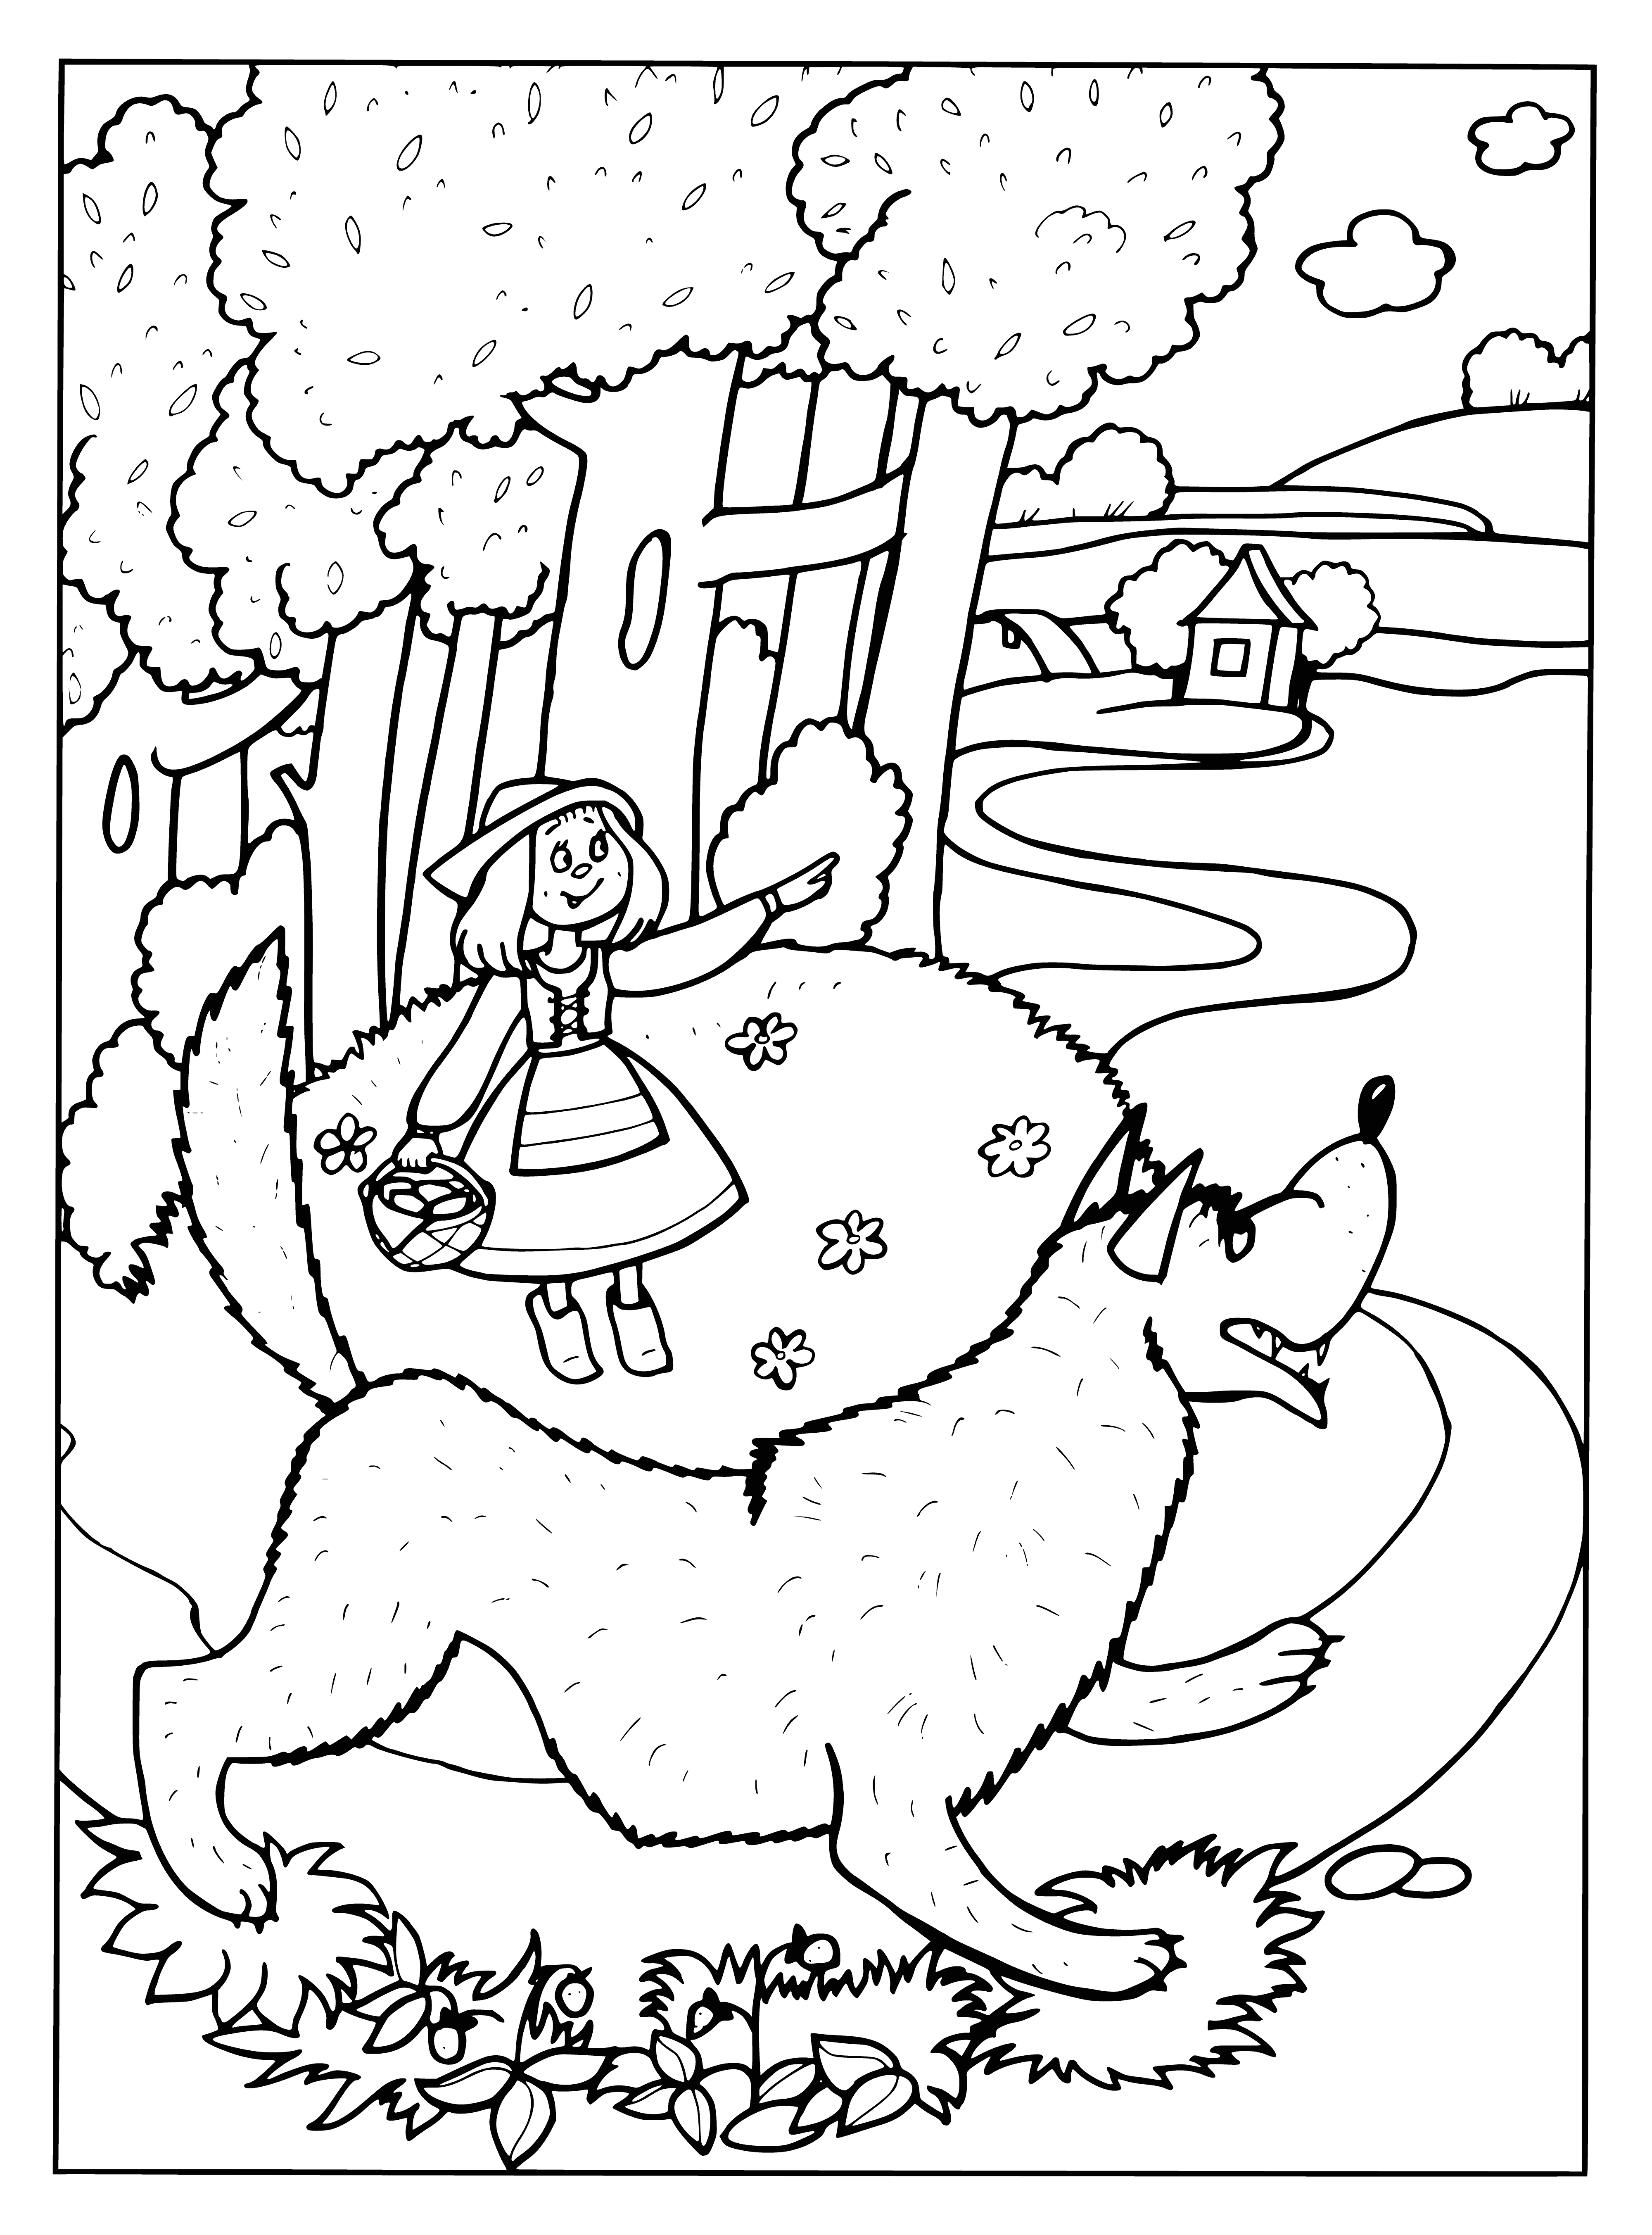 coloring page: A wolf pretends to be friendly to a girl, planning to eat her at her Grandmother's house. The wolf stops to eat & nap, but the girl escapes & Grandmother foils the wolf by grabbing scissors & cutting off his head! #wildtale #grannysmart